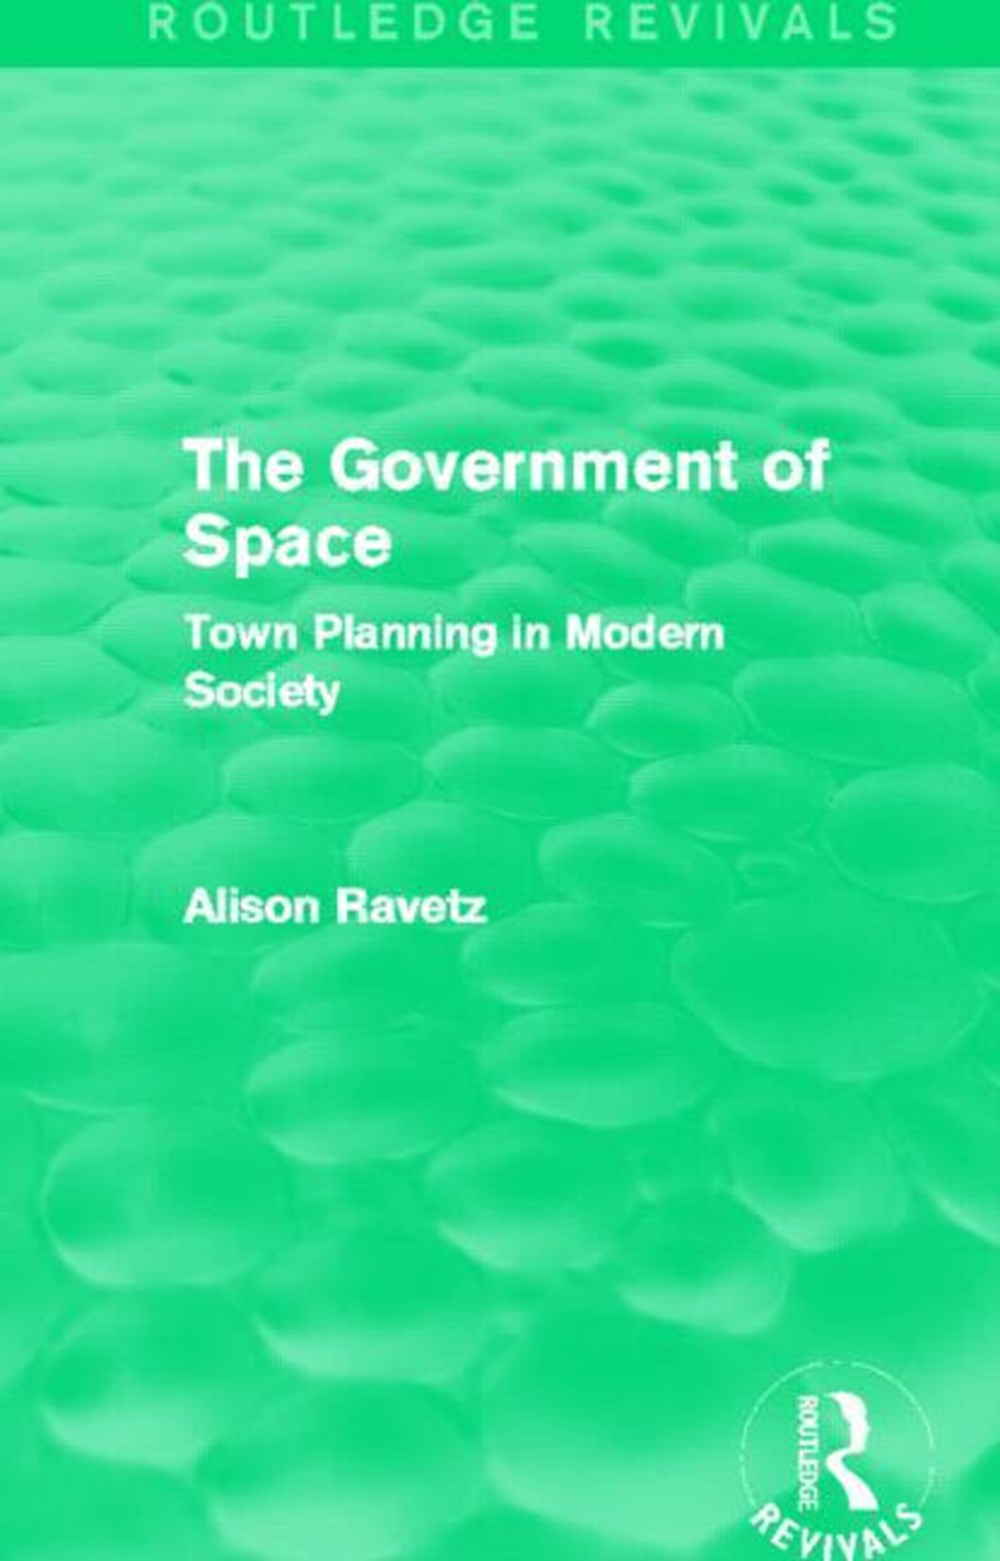 Government of Space (Routledge Revivals): Town Planning in Modern Society